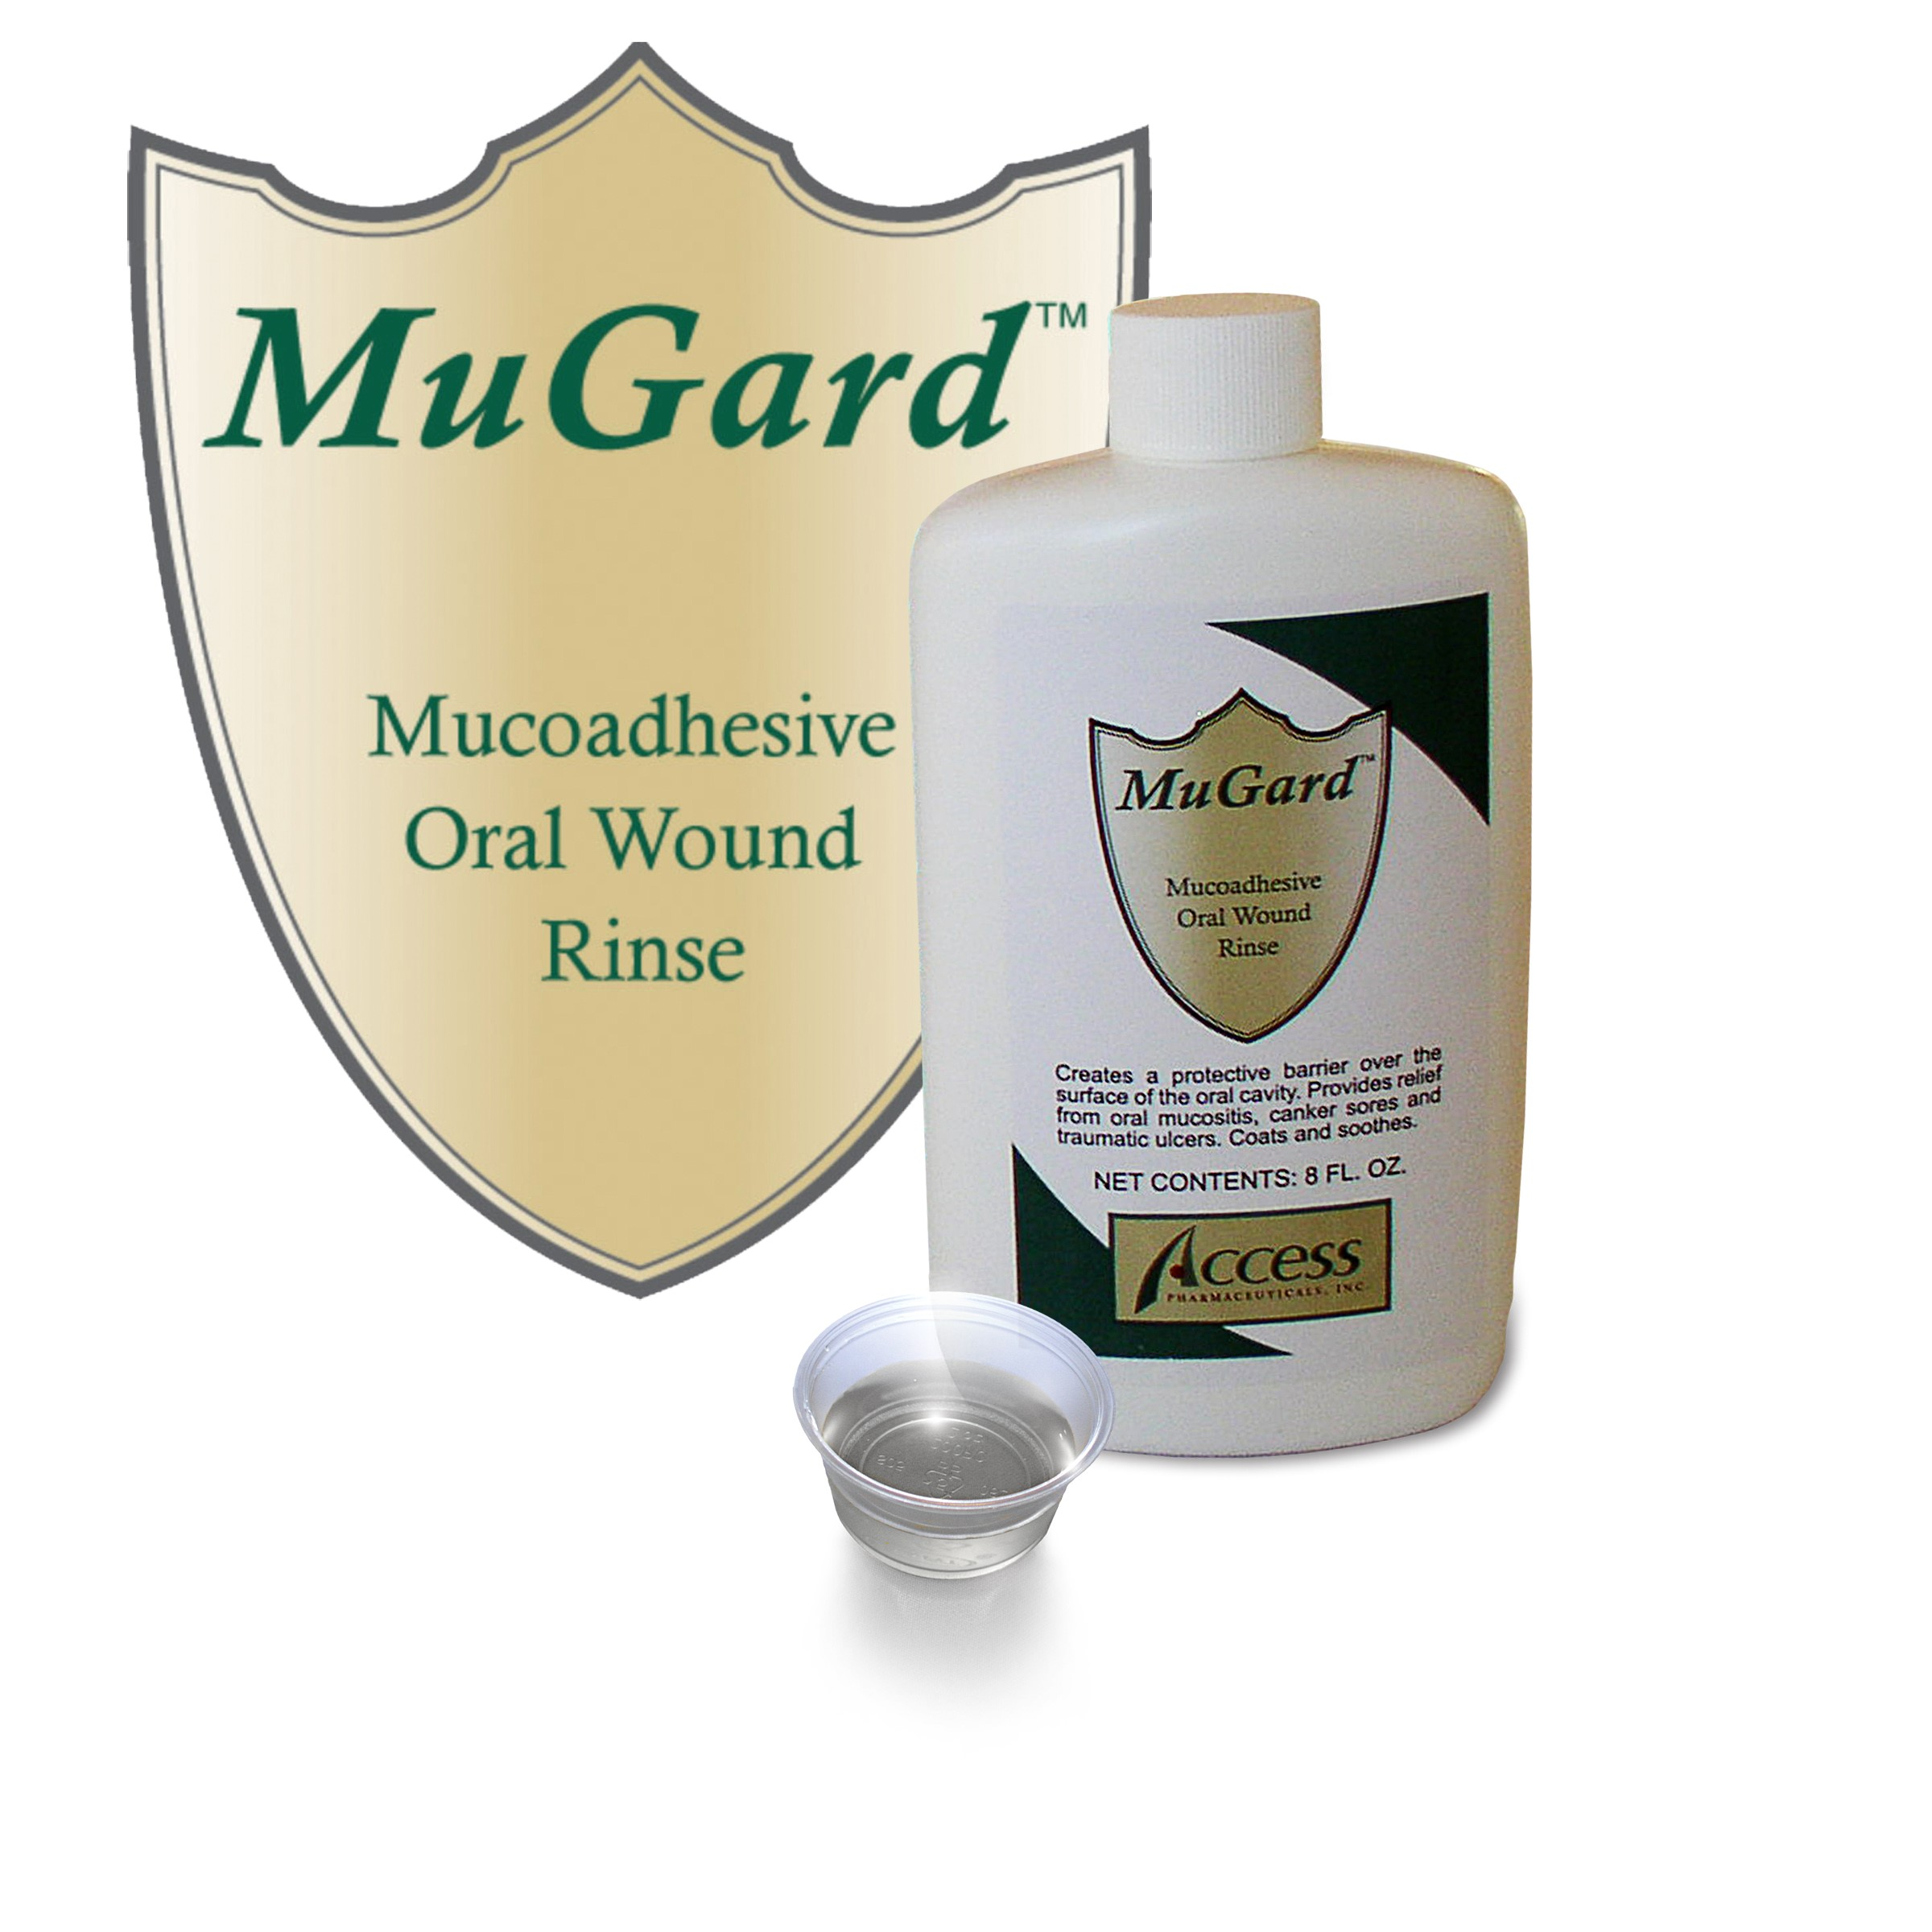 MuGard by Access pharmaceuticals